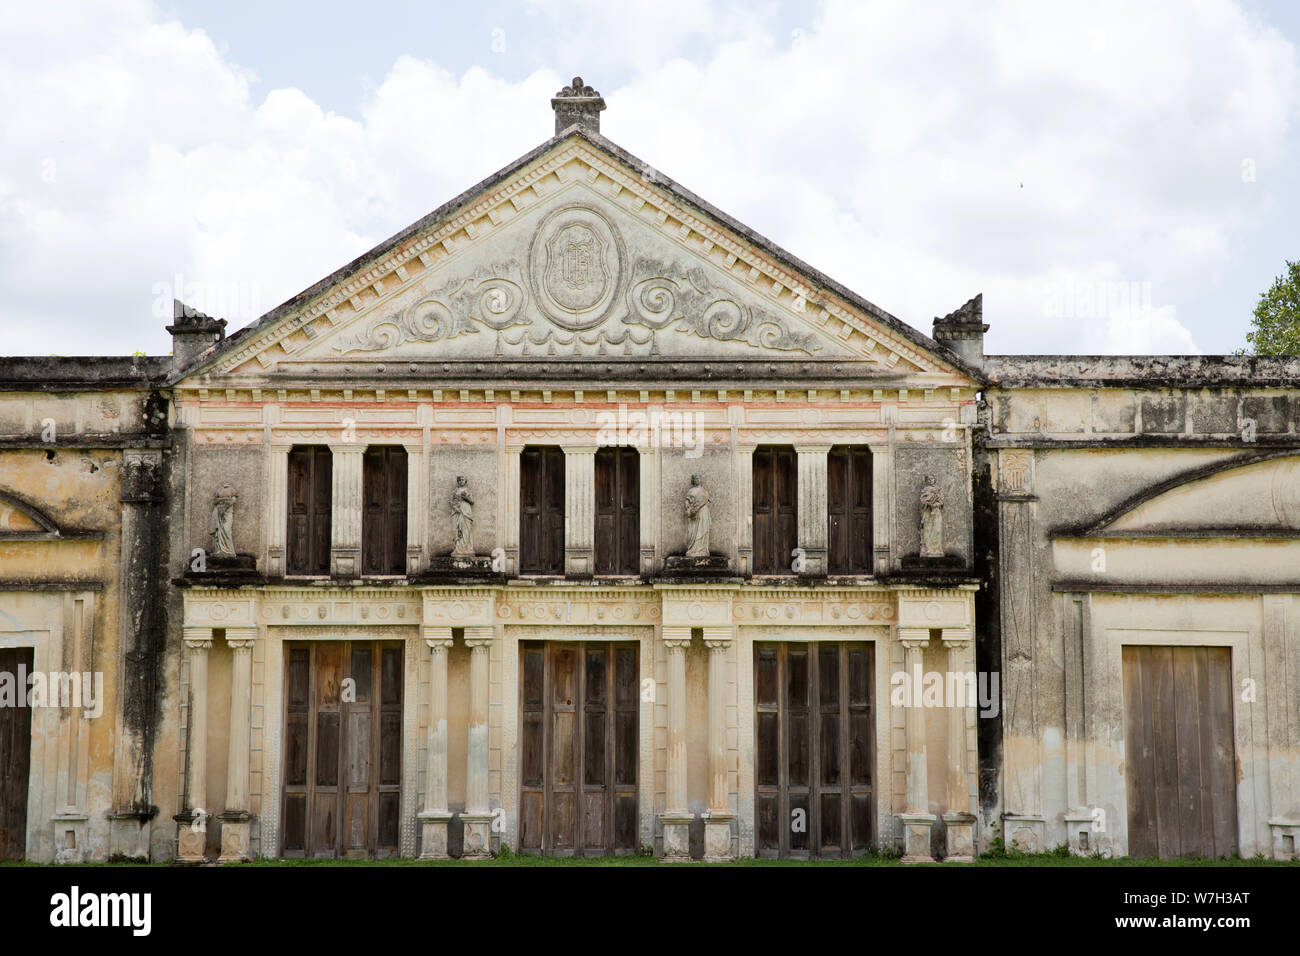 Henequen workshops, wharehouse and packing room at Hacienda Yaxcopoil in the Uman Municipality, state of Yucatan, Mexico on July 22, 2019. Hacienda Yaxcopoil dates back to the 17th century and was once considered one of the most important rural estates in the Yucatan, spreading across 22,000 acres. It operated first as a cattle ranch and later as a henequen plantation during the golden age of the 'agave sisal'. Over time, due to continuous political, social and economic changes, the estate has been reduced to less than 3% of its original size. The production of henequen fiber in the hacienda e Stock Photo